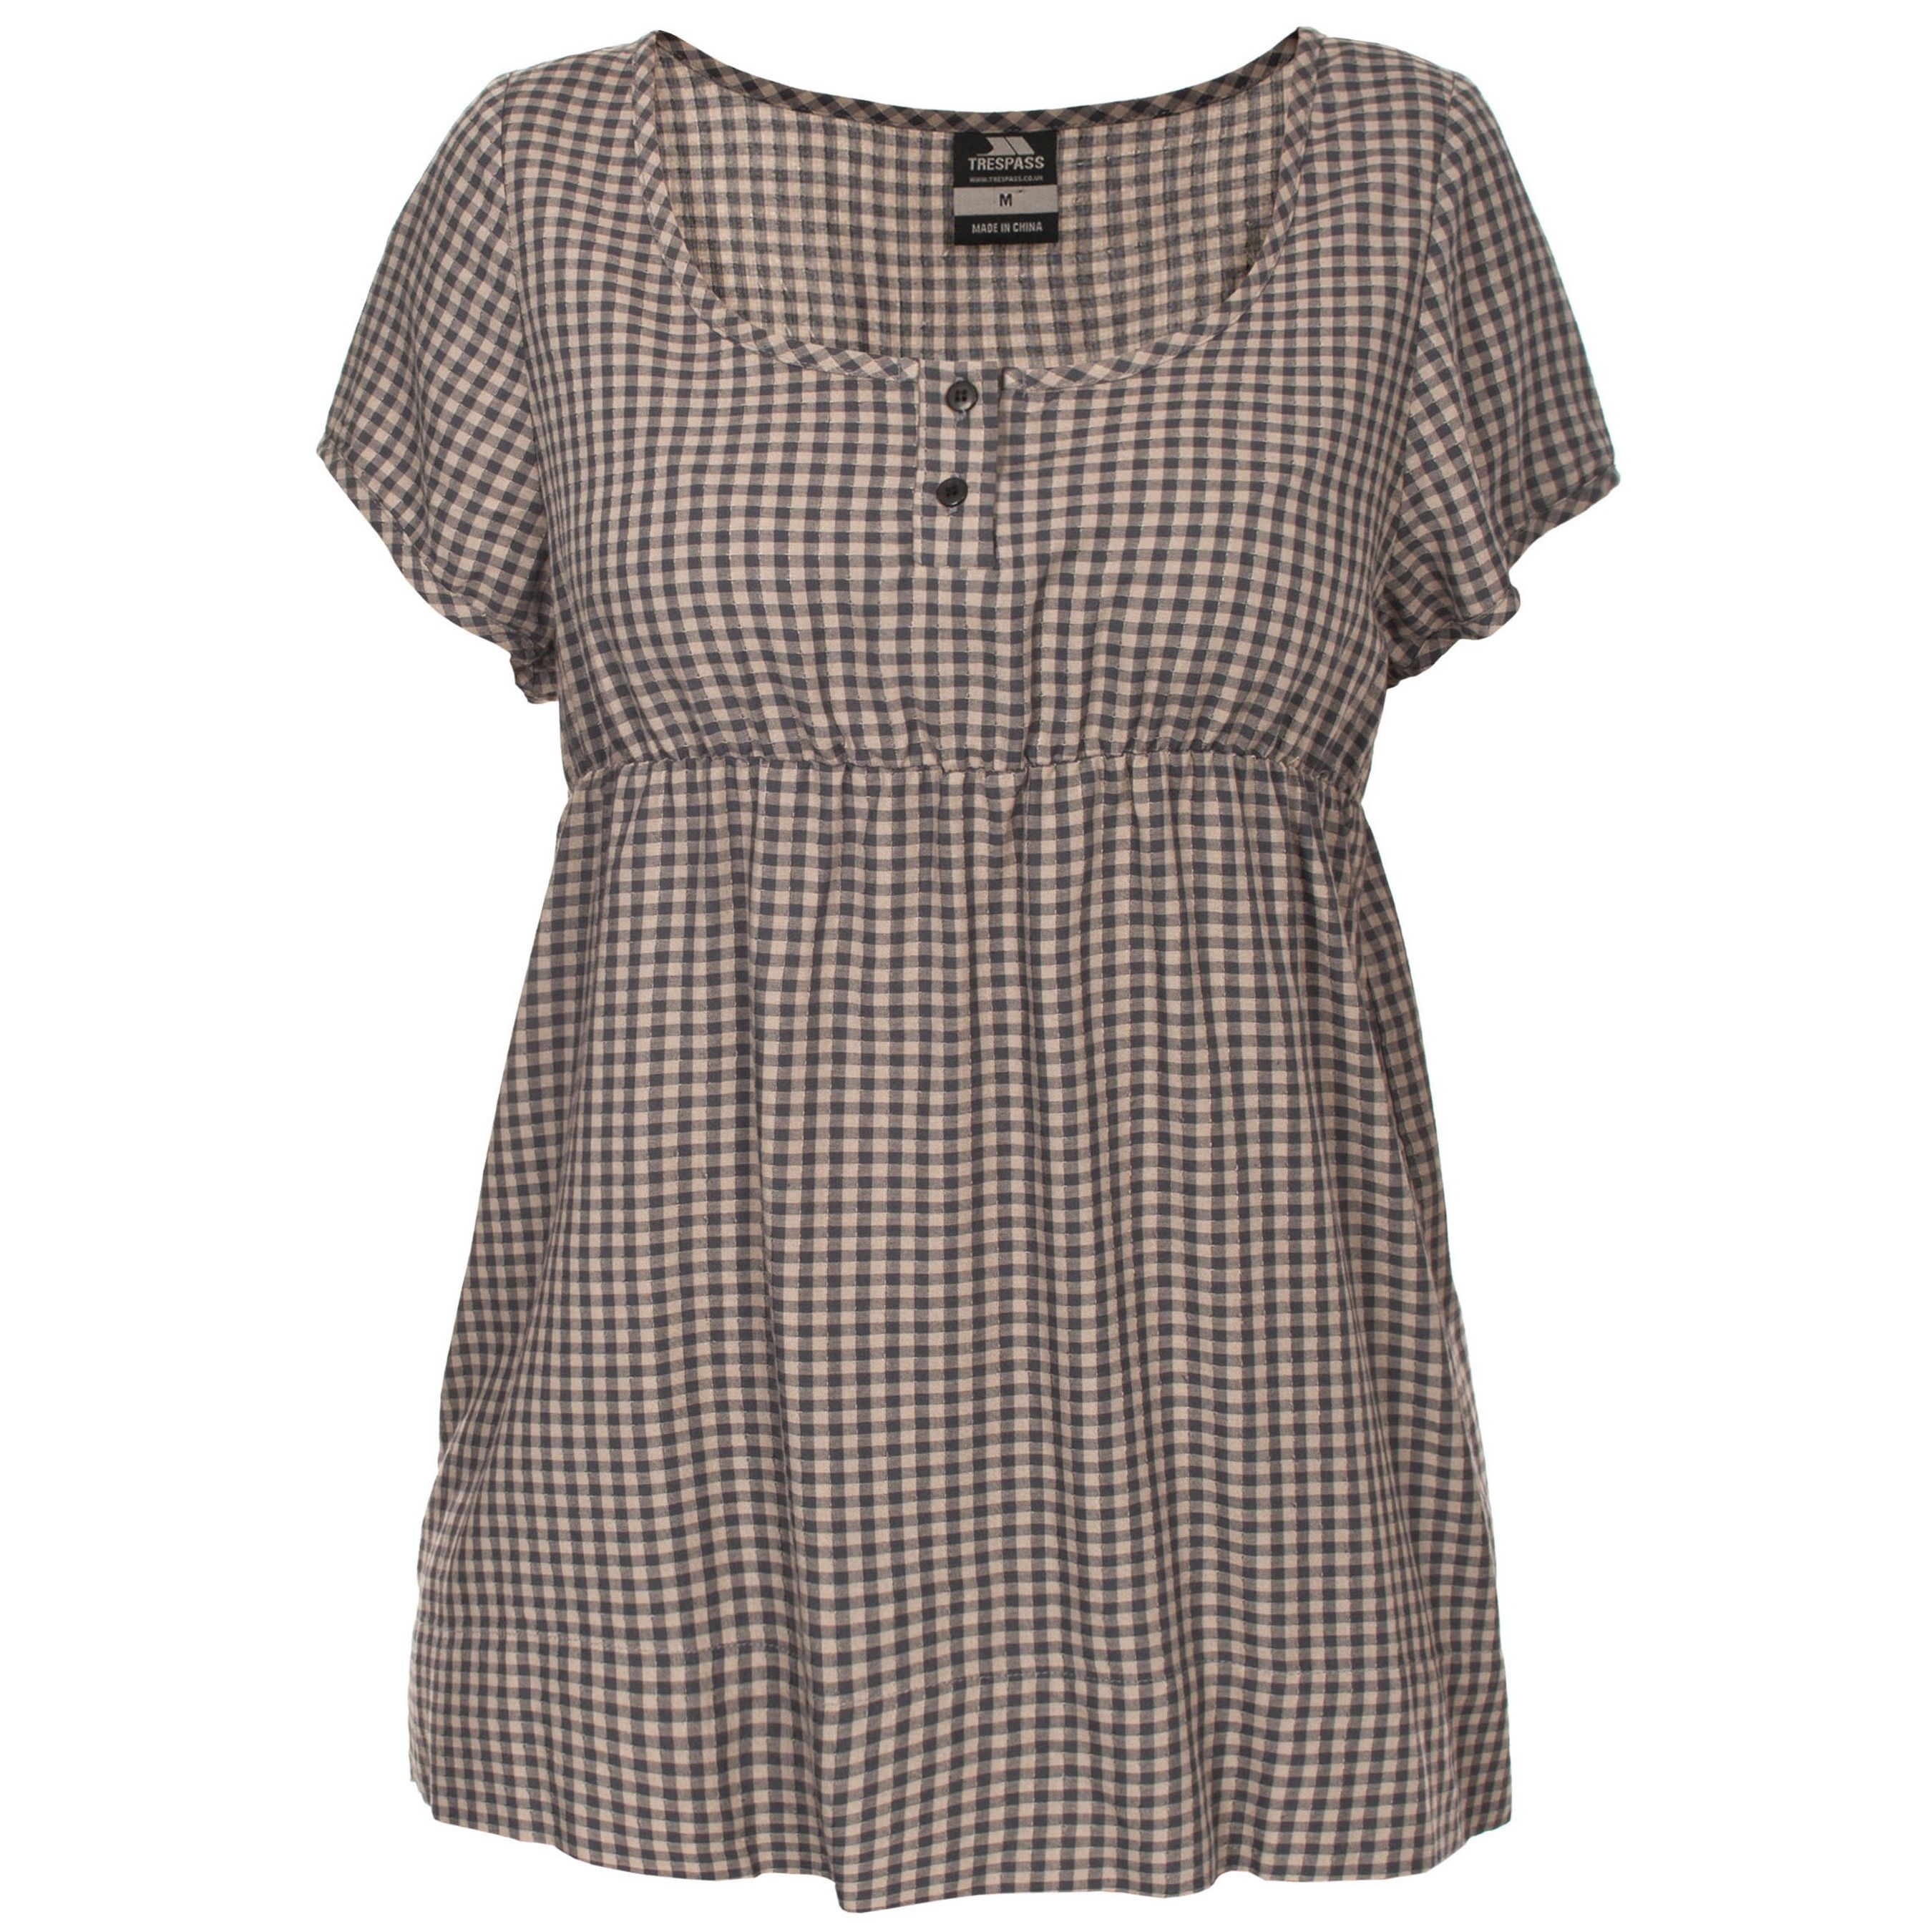 Round scooped neck. Short sleeves. Button fastening. Elastic under bust. 100% Viscose printed. Trespass Womens Chest Sizing (approx): XS/8 - 32in/81cm, S/10 - 34in/86cm, M/12 - 36in/91.4cm, L/14 - 38in/96.5cm, XL/16 - 40in/101.5cm, XXL/18 - 42in/106.5cm.